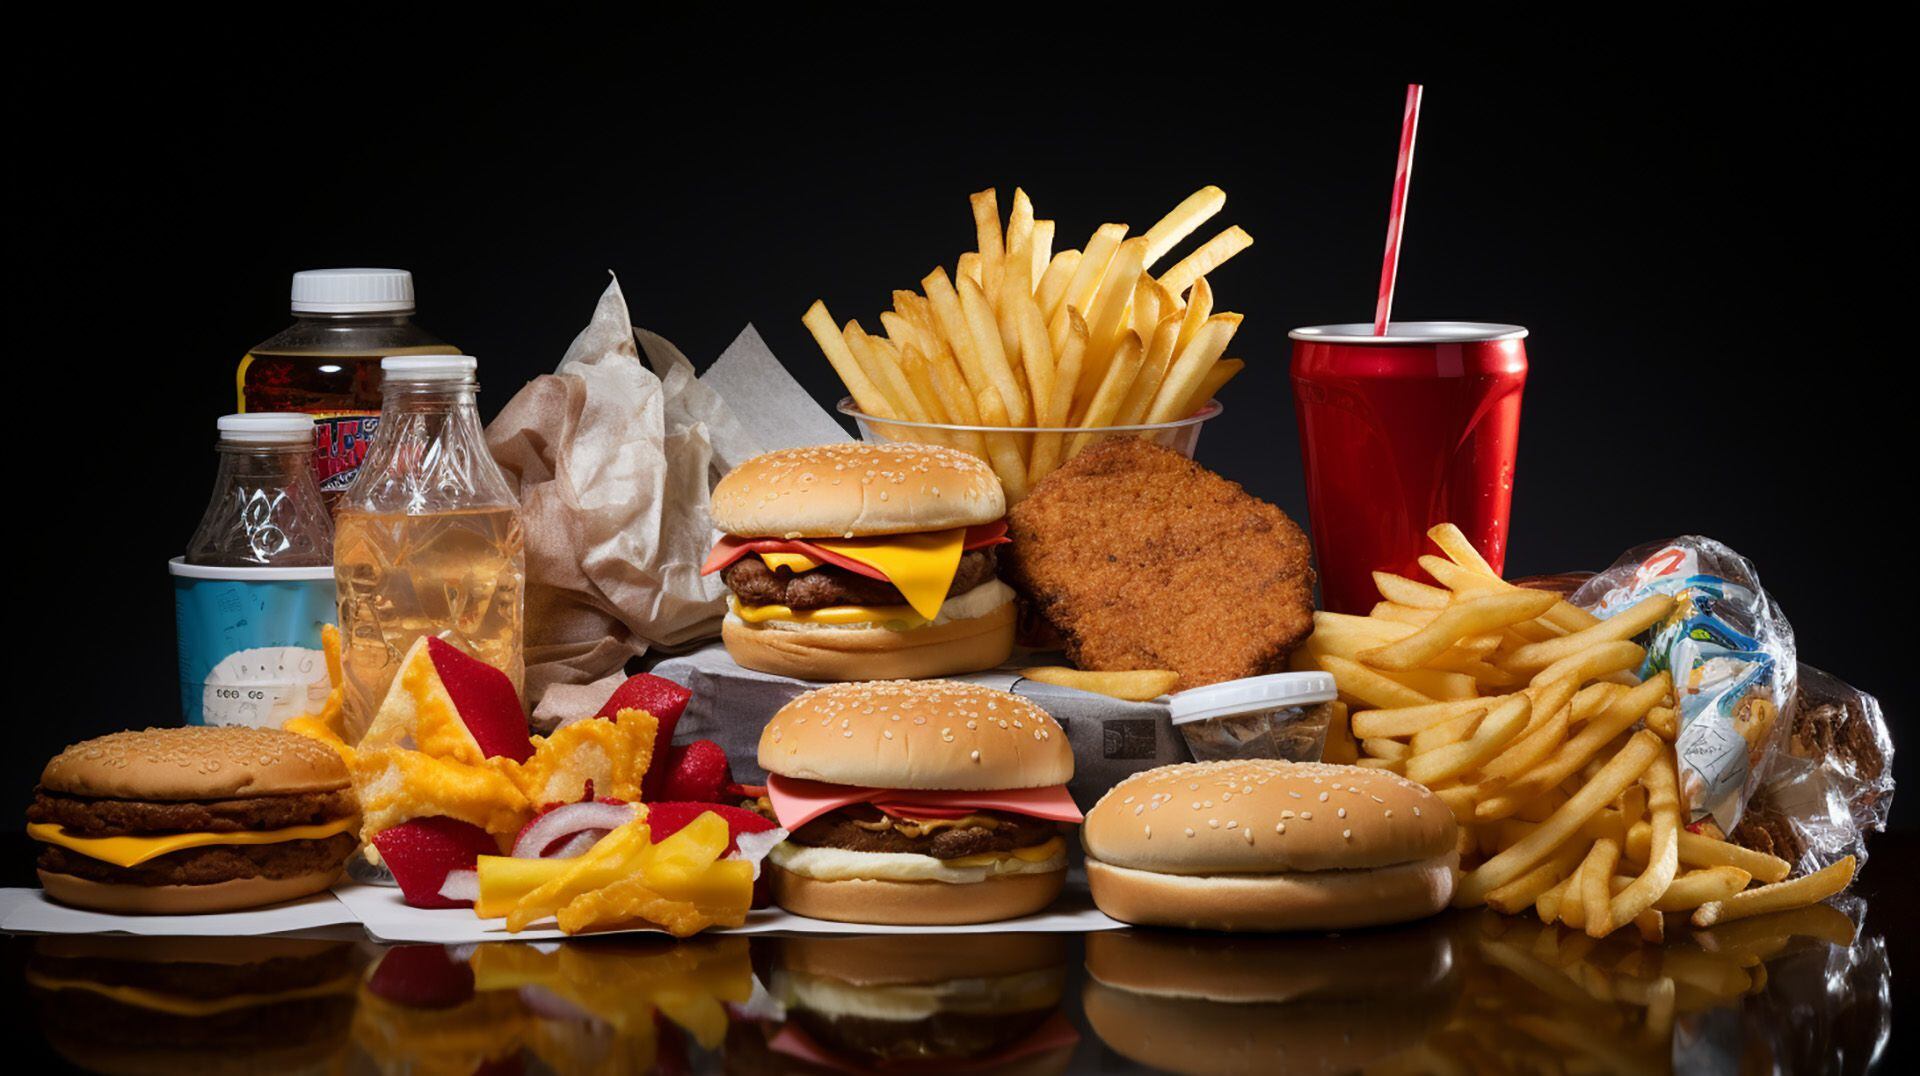 Eating ultra-processed foods is related to a higher risk of obesity, diabetes, heart disease and death from any cause (Illustrative image Infobae)